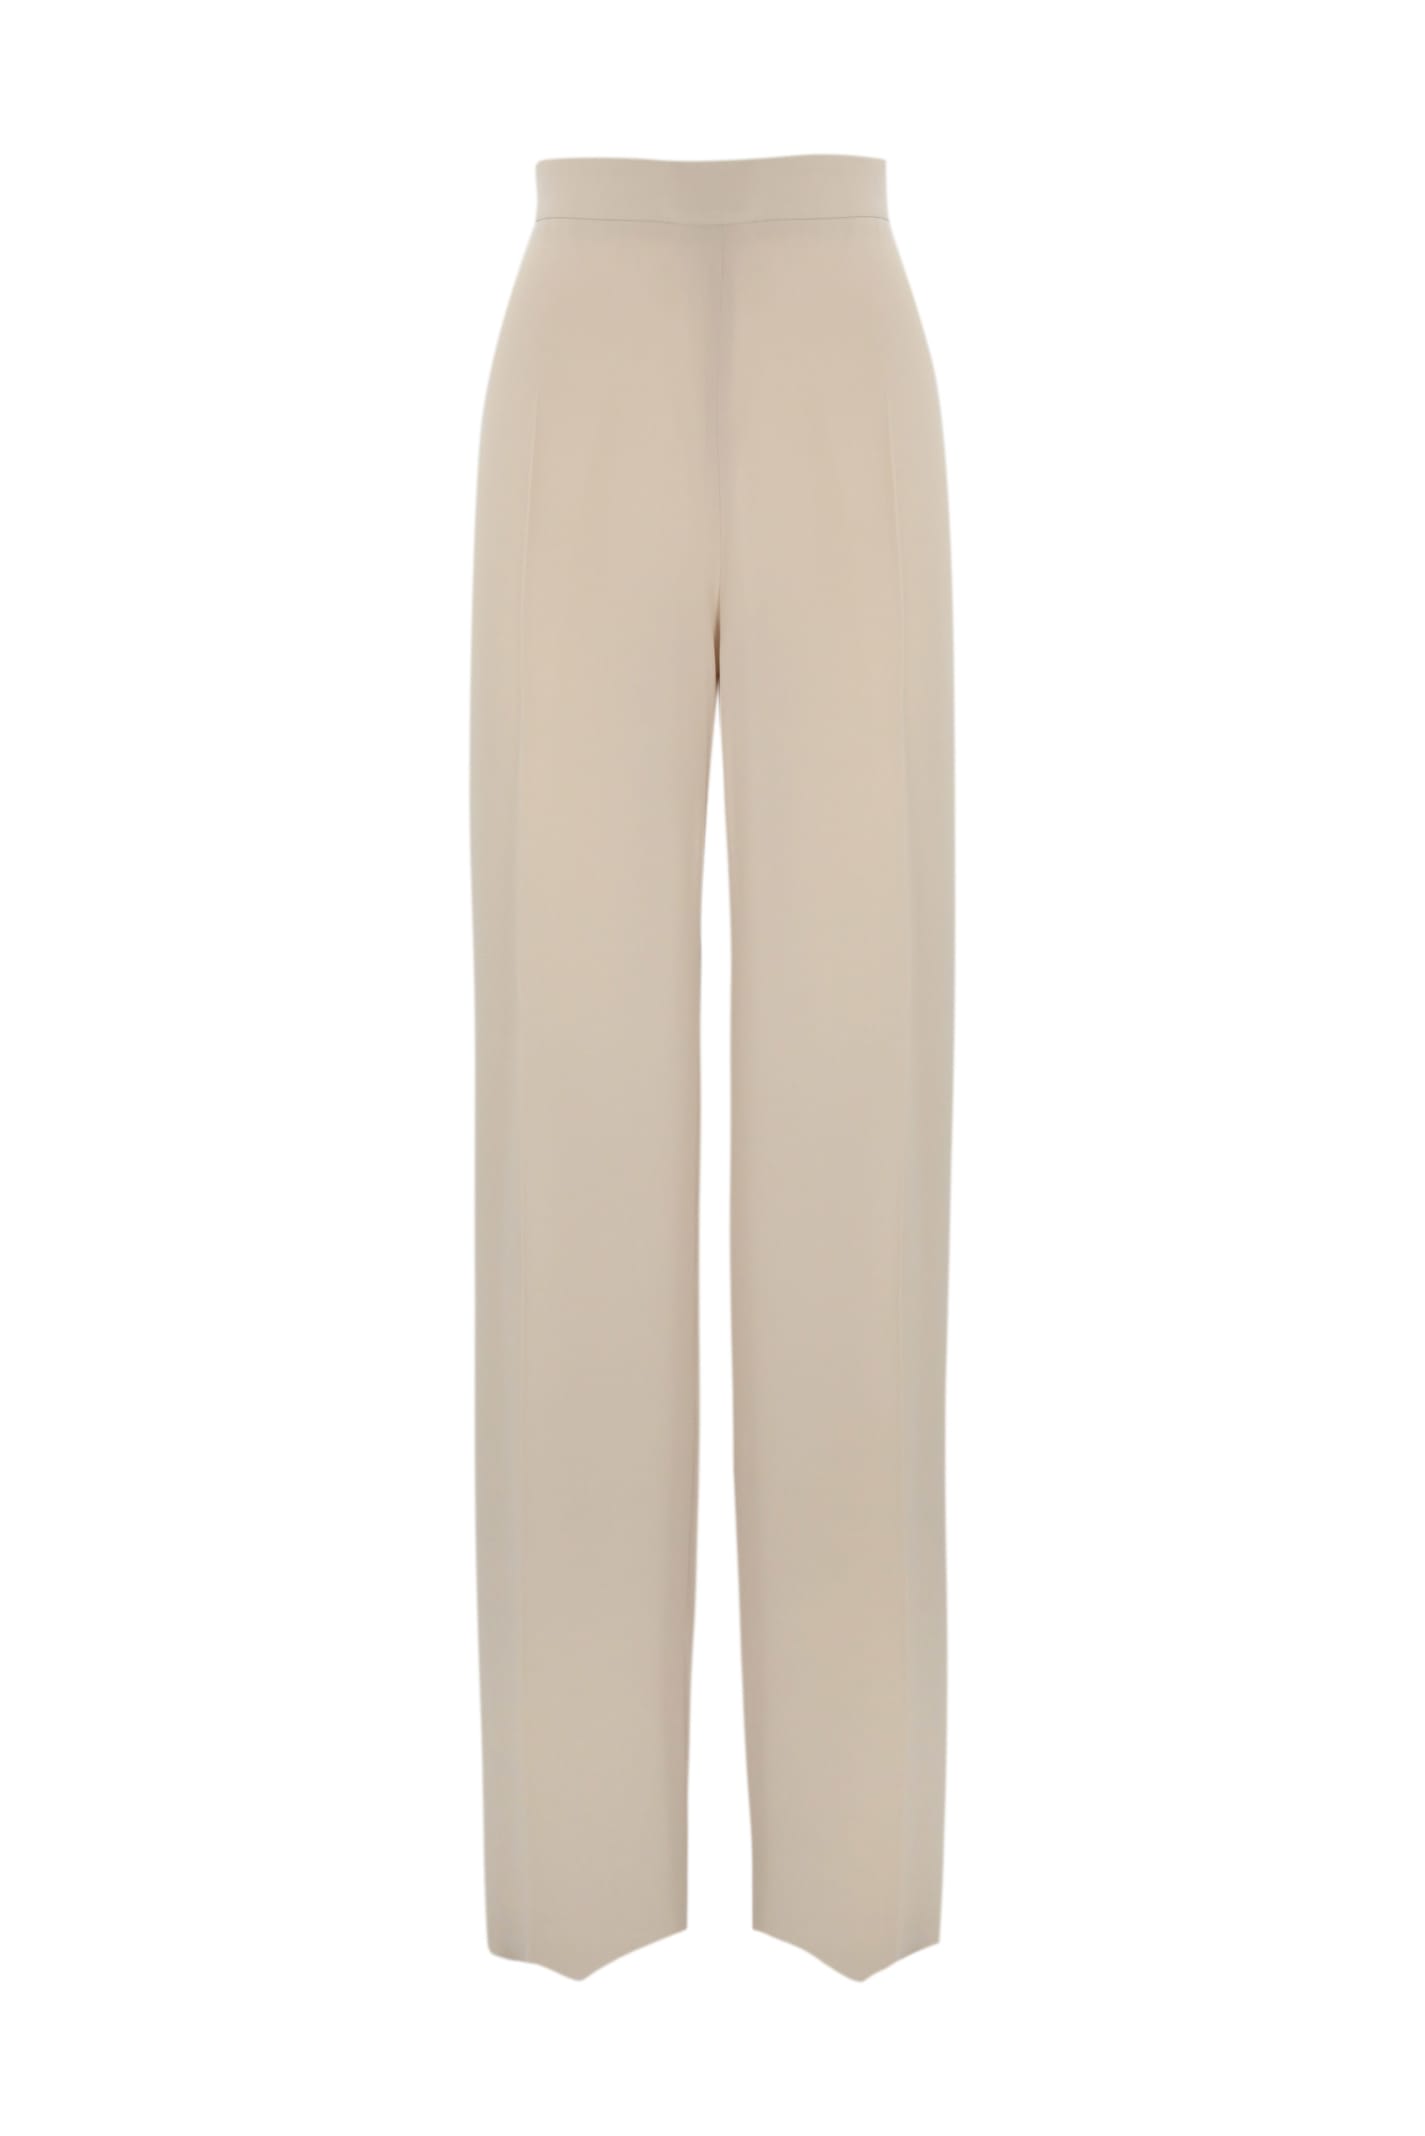 maresca Cady Trousers